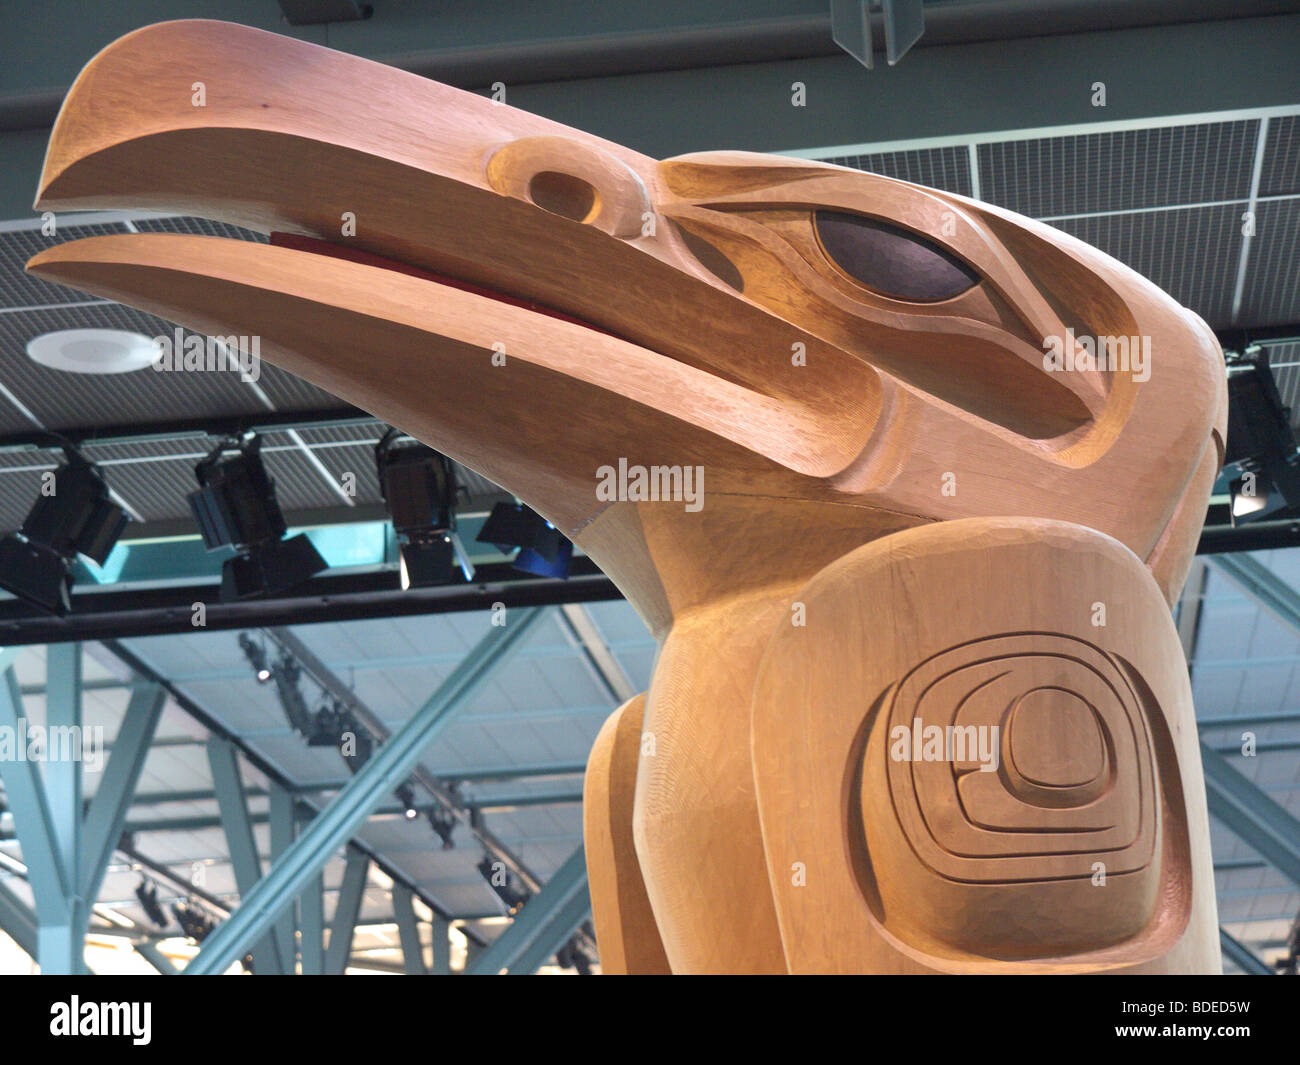 Gigantic Wooden Sculptures sited in Vancouver Airport, British Columbia, Canada Stock Photo